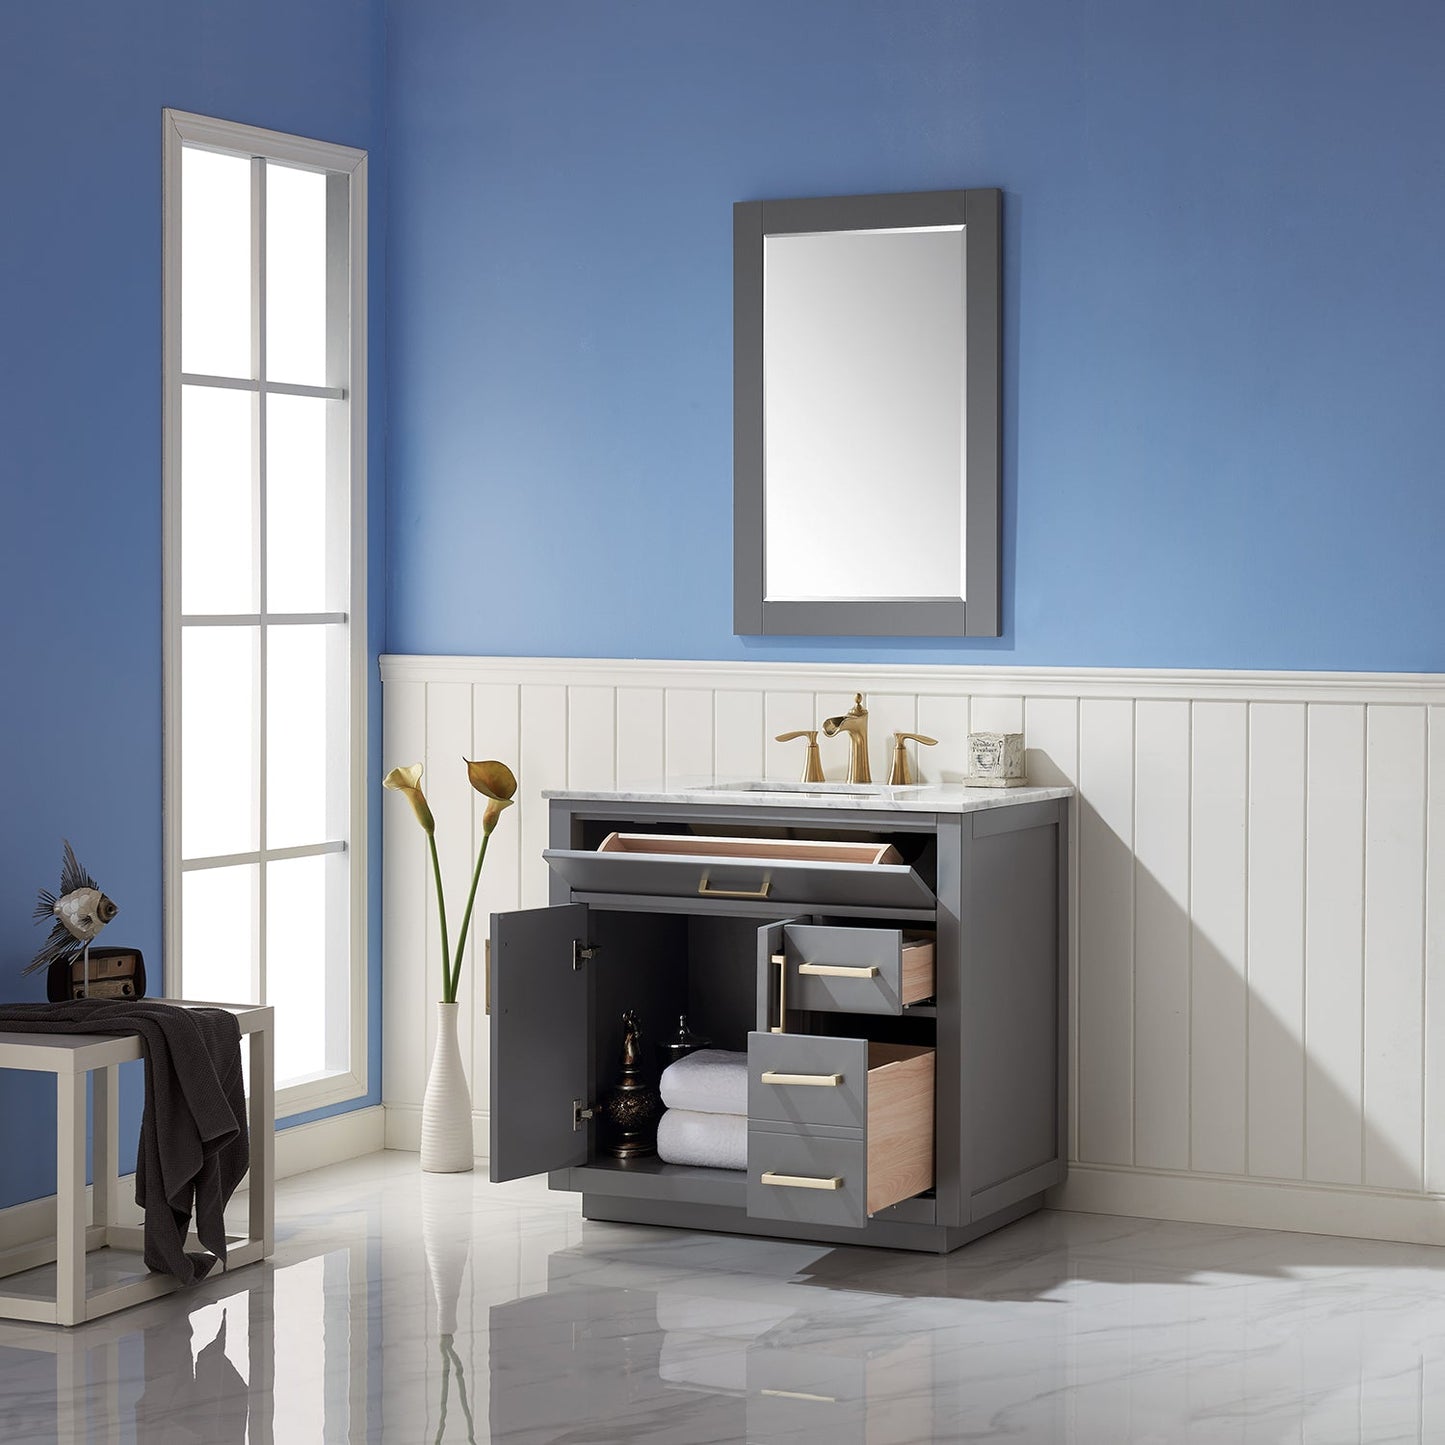 Ivy 36" Single Bathroom Vanity Set in Gray and Carrara White Marble Countertop with Mirror